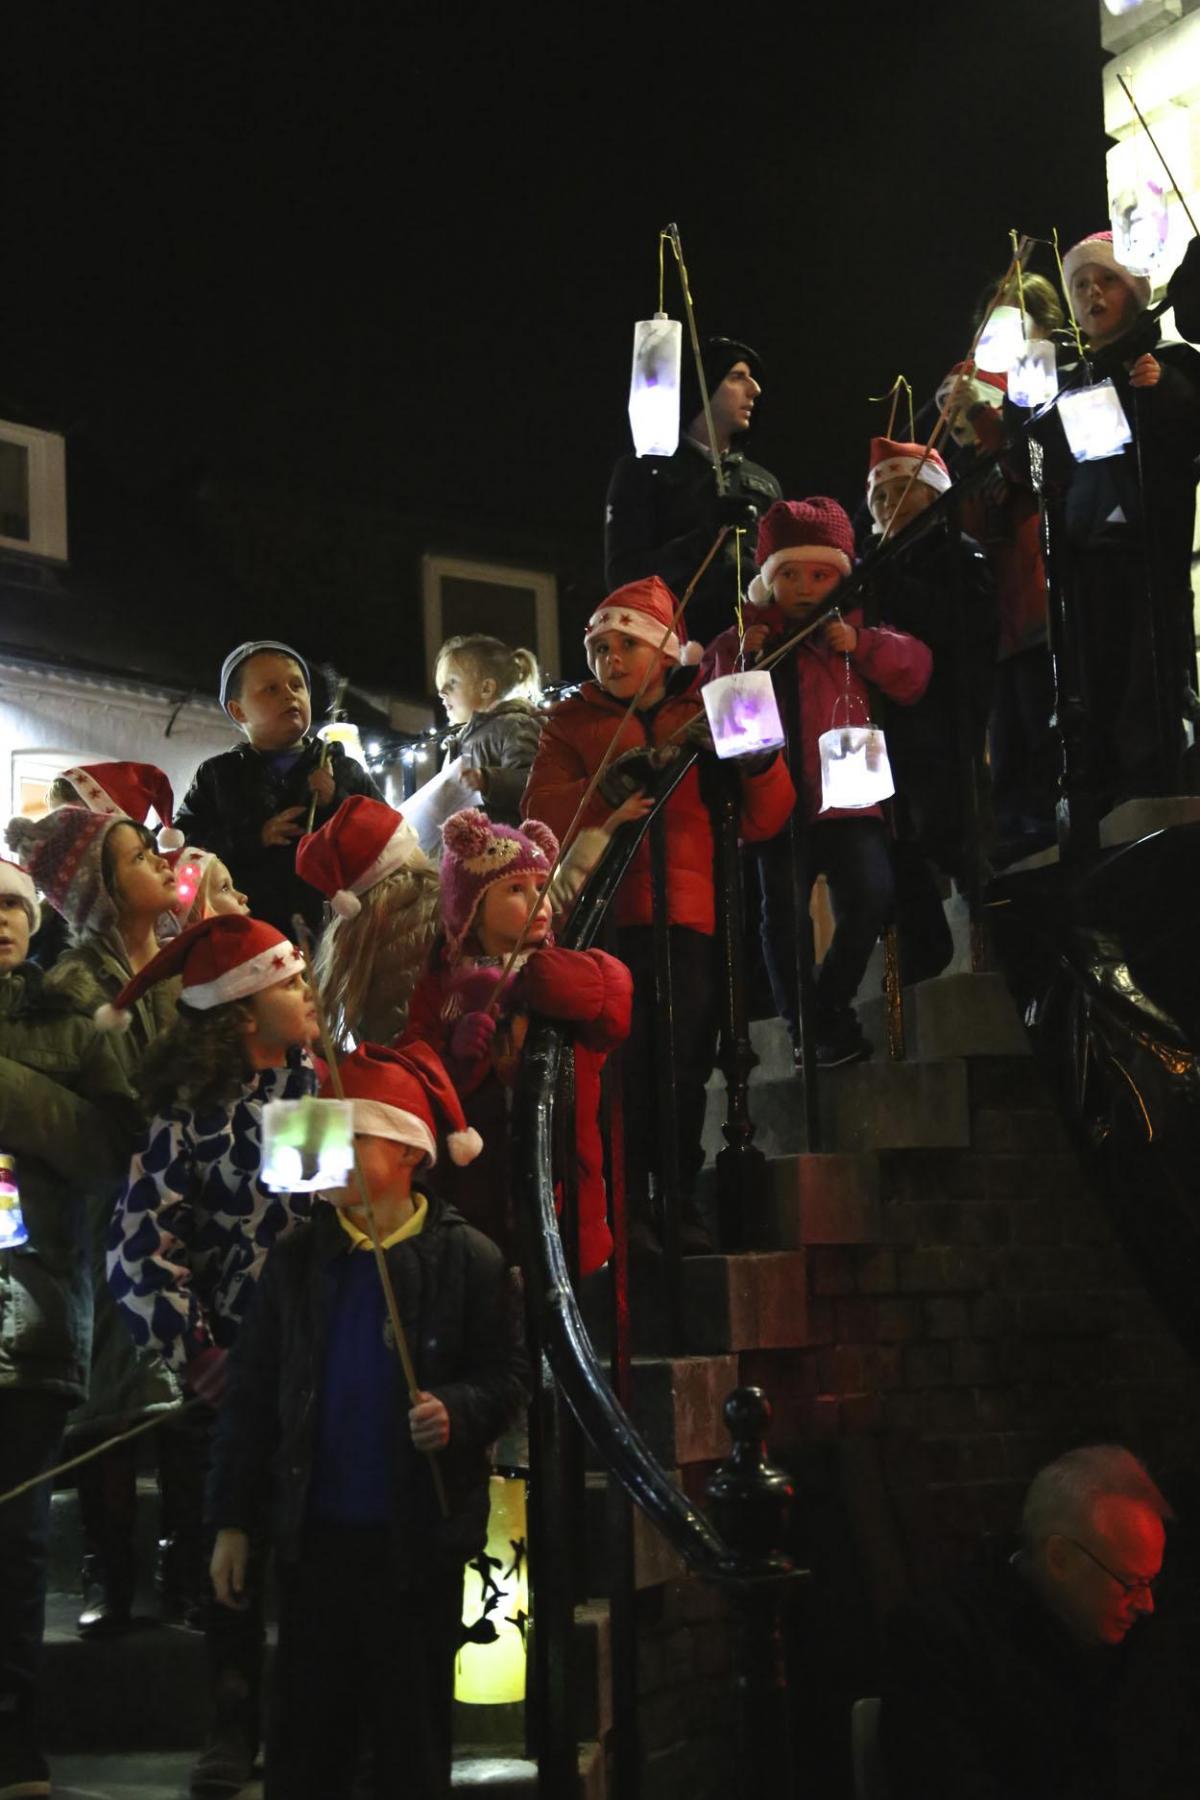 All our pictures of Poole Lantern Parade by Samantha Sheldon. 